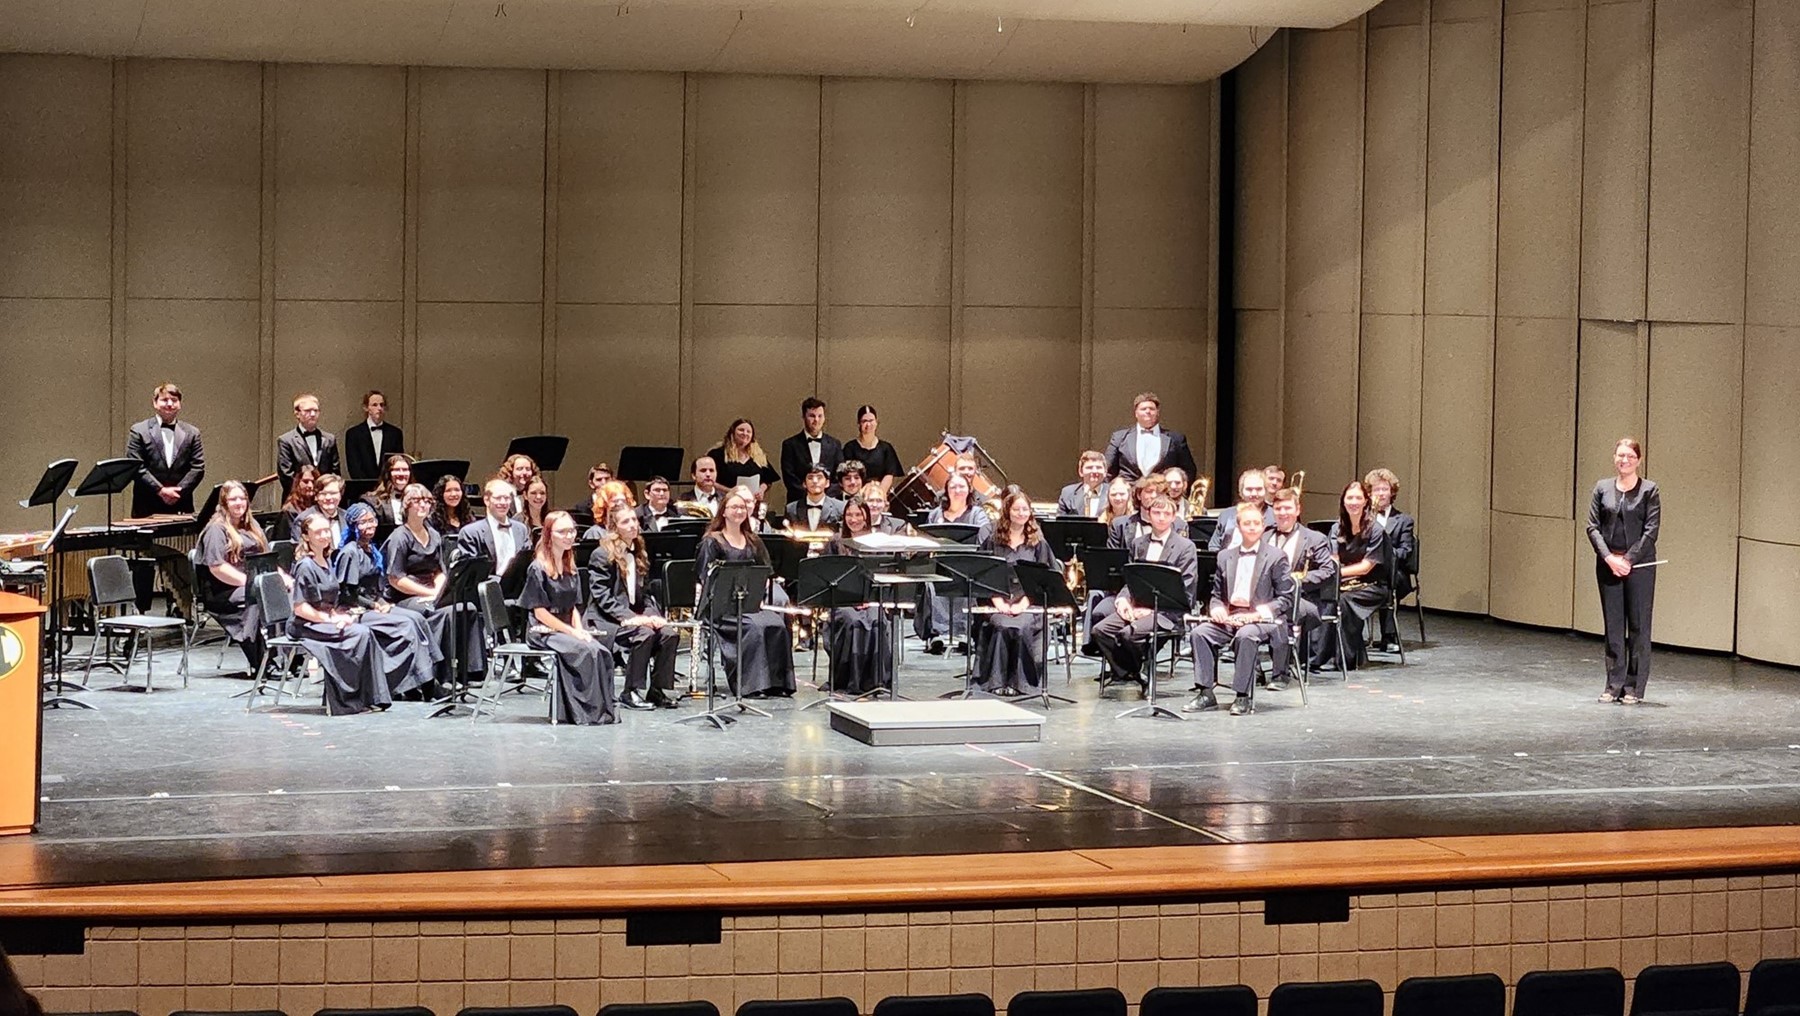 Our BHS Symphonic Band earned an EXCELLENT RATING at the OMEA District 6 Adjudicated Event!